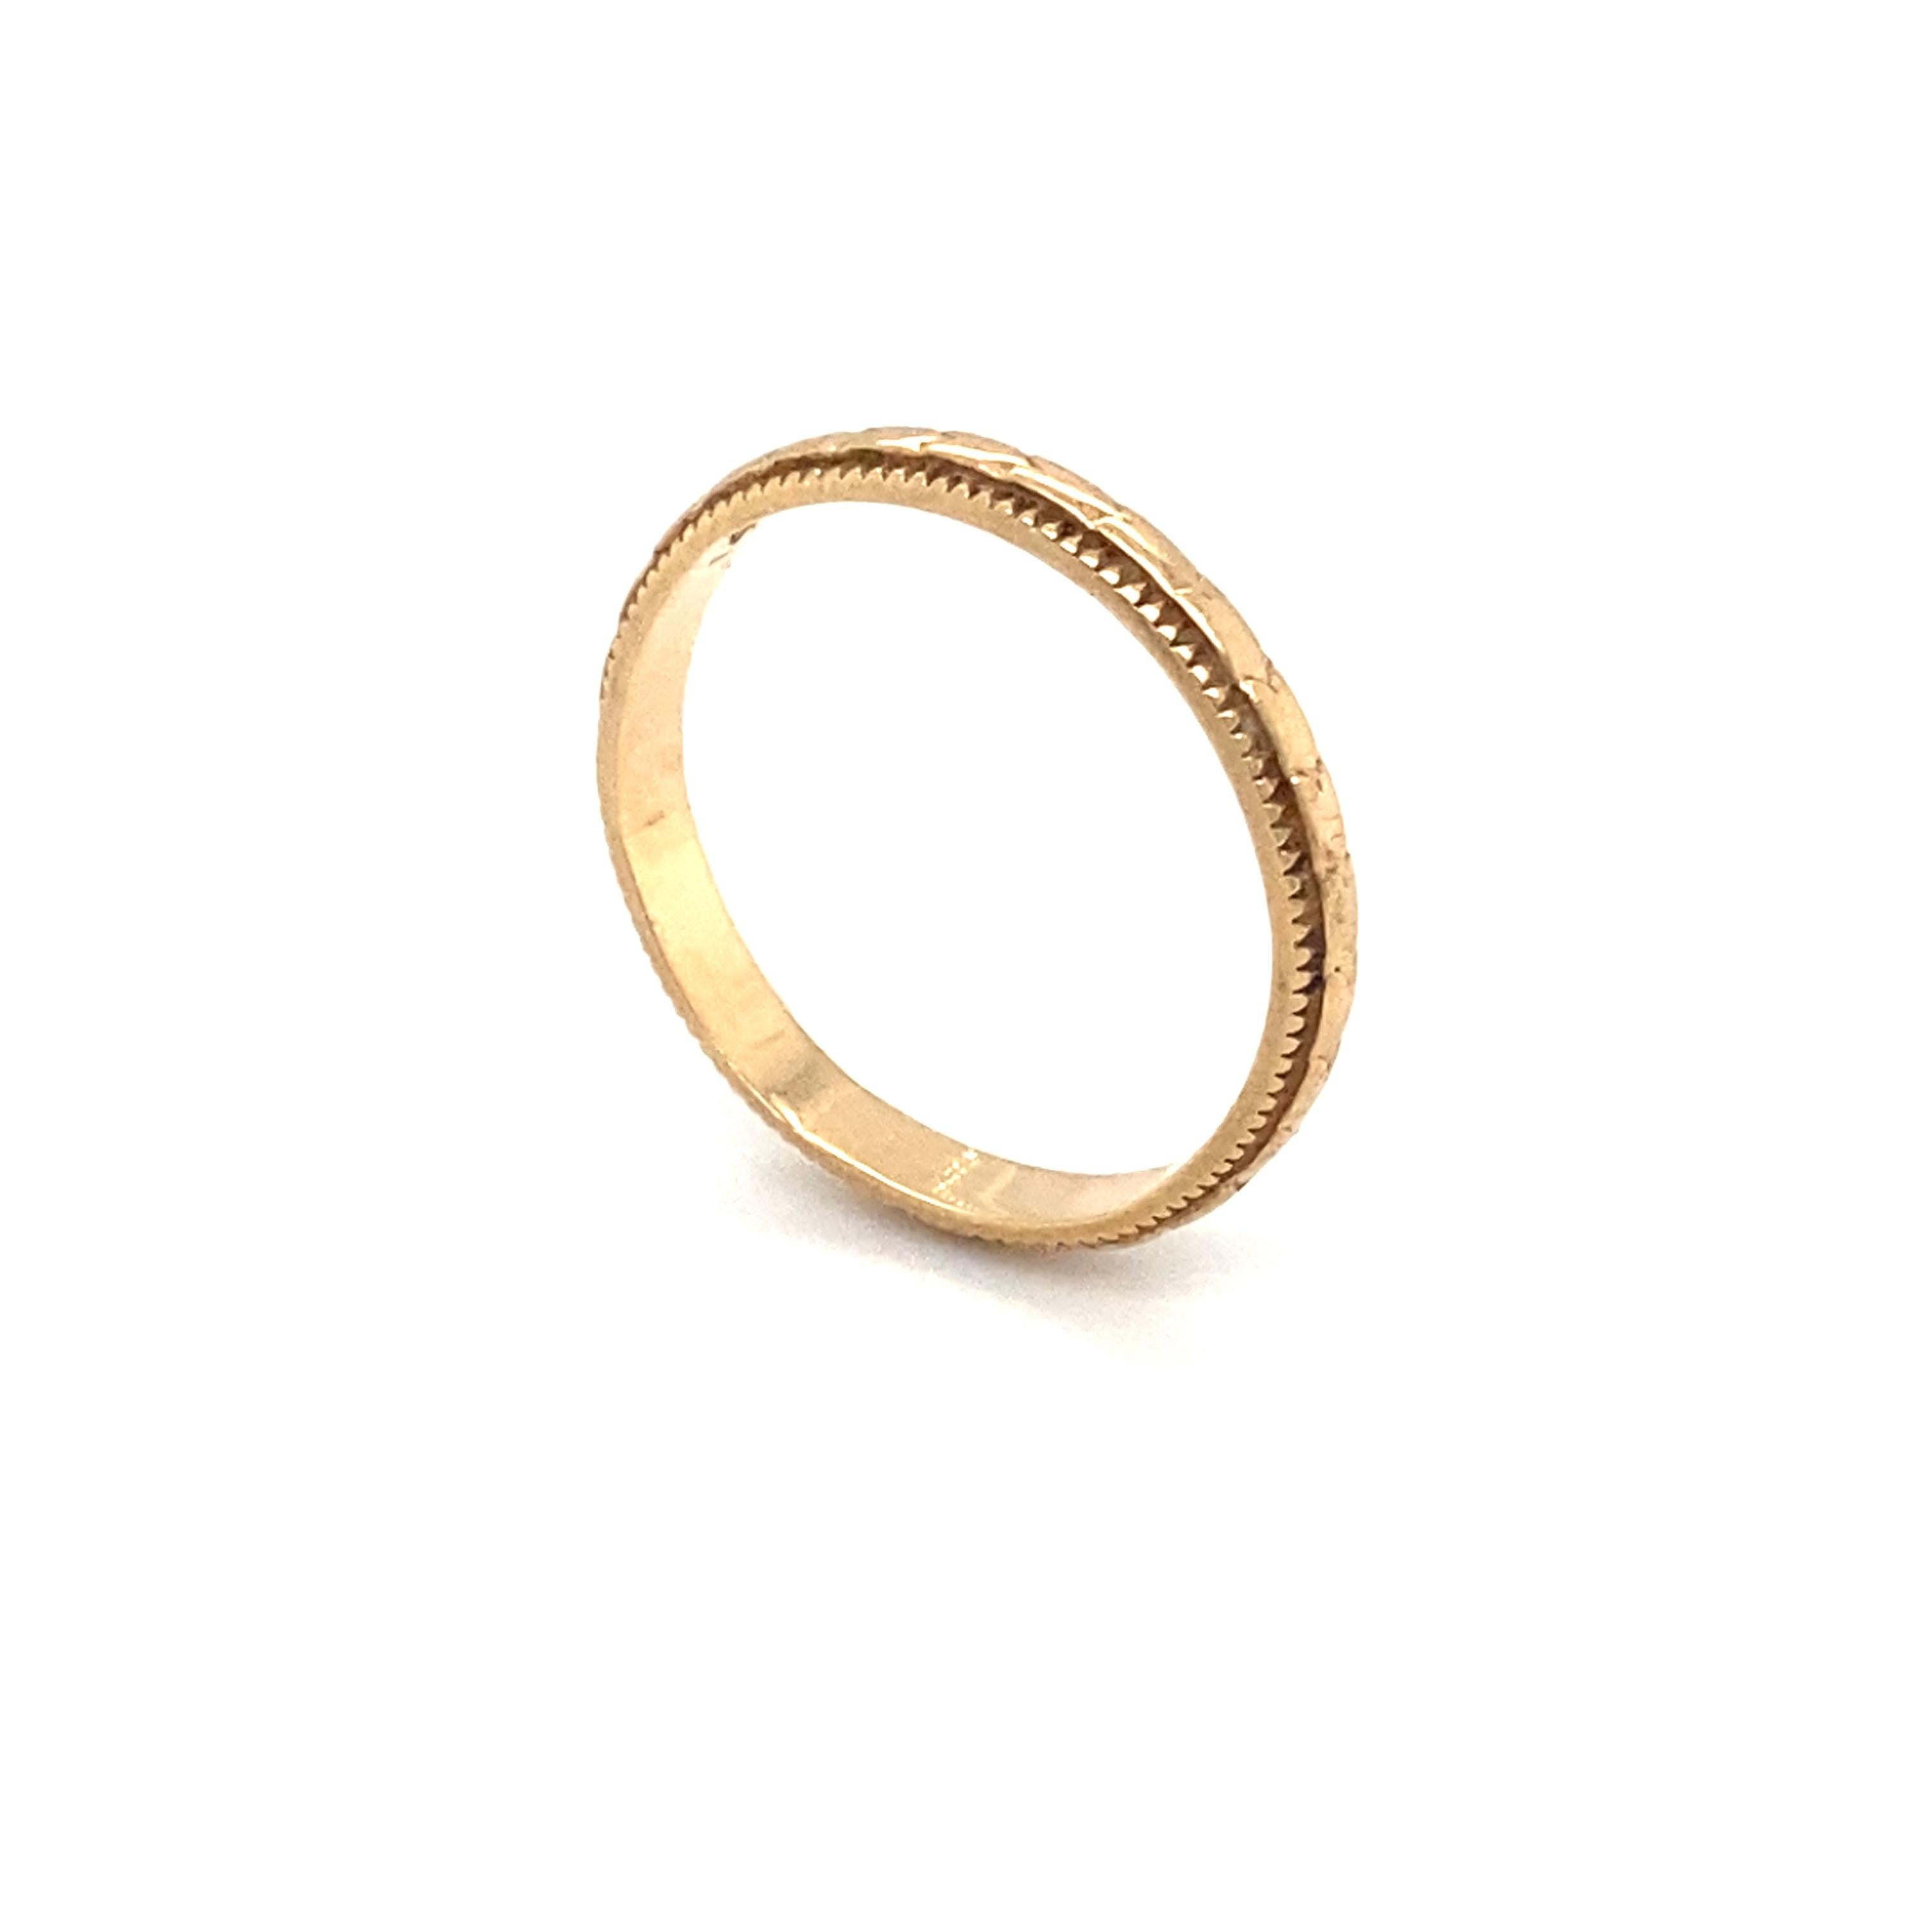 Circa 1920s, Art Deco Etched Gold Band Ring in 14 Karat Yellow Gold For Sale 1